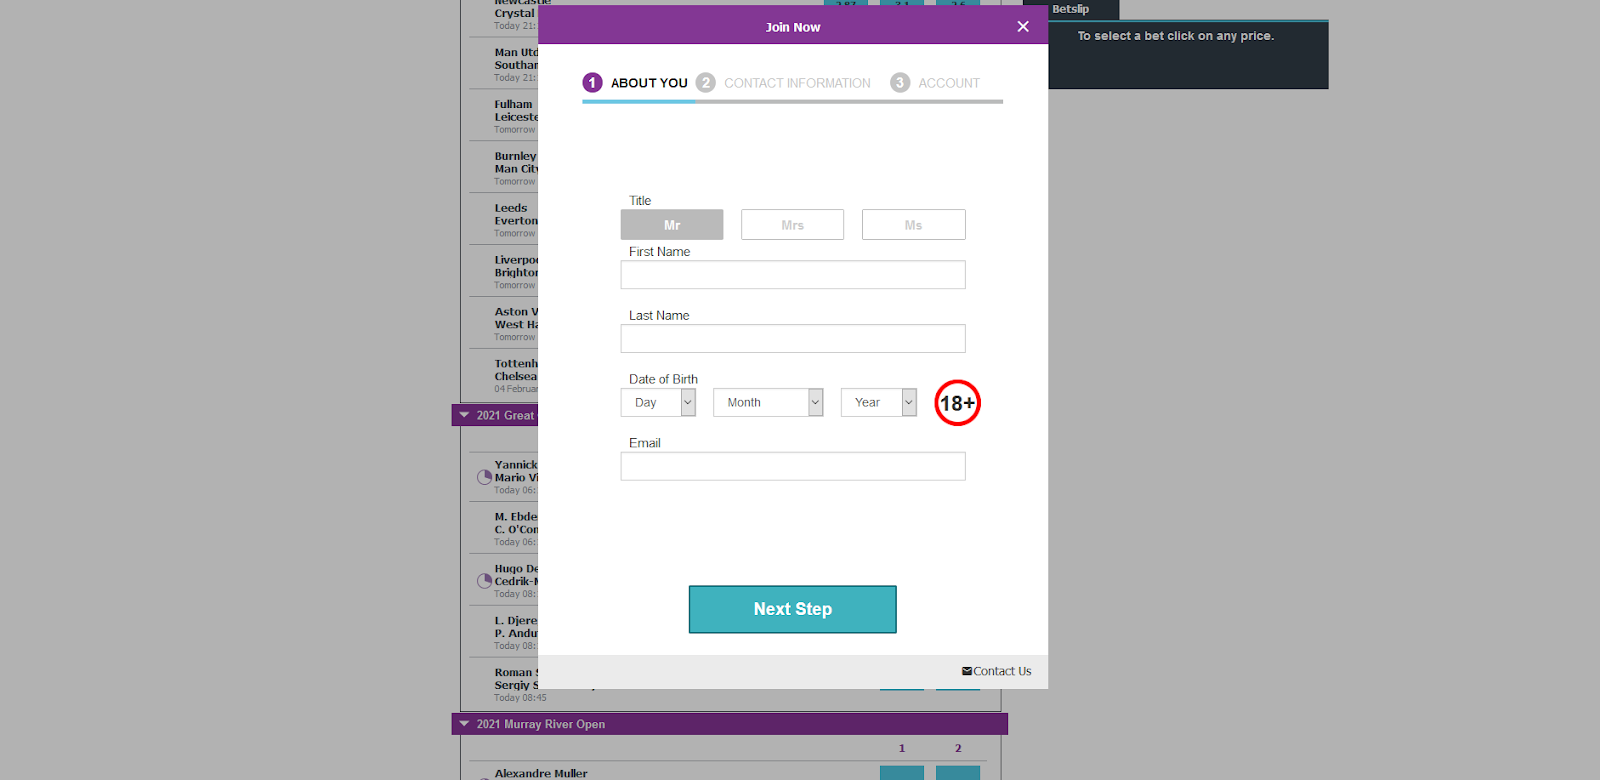 Betdaq log-in and registration page